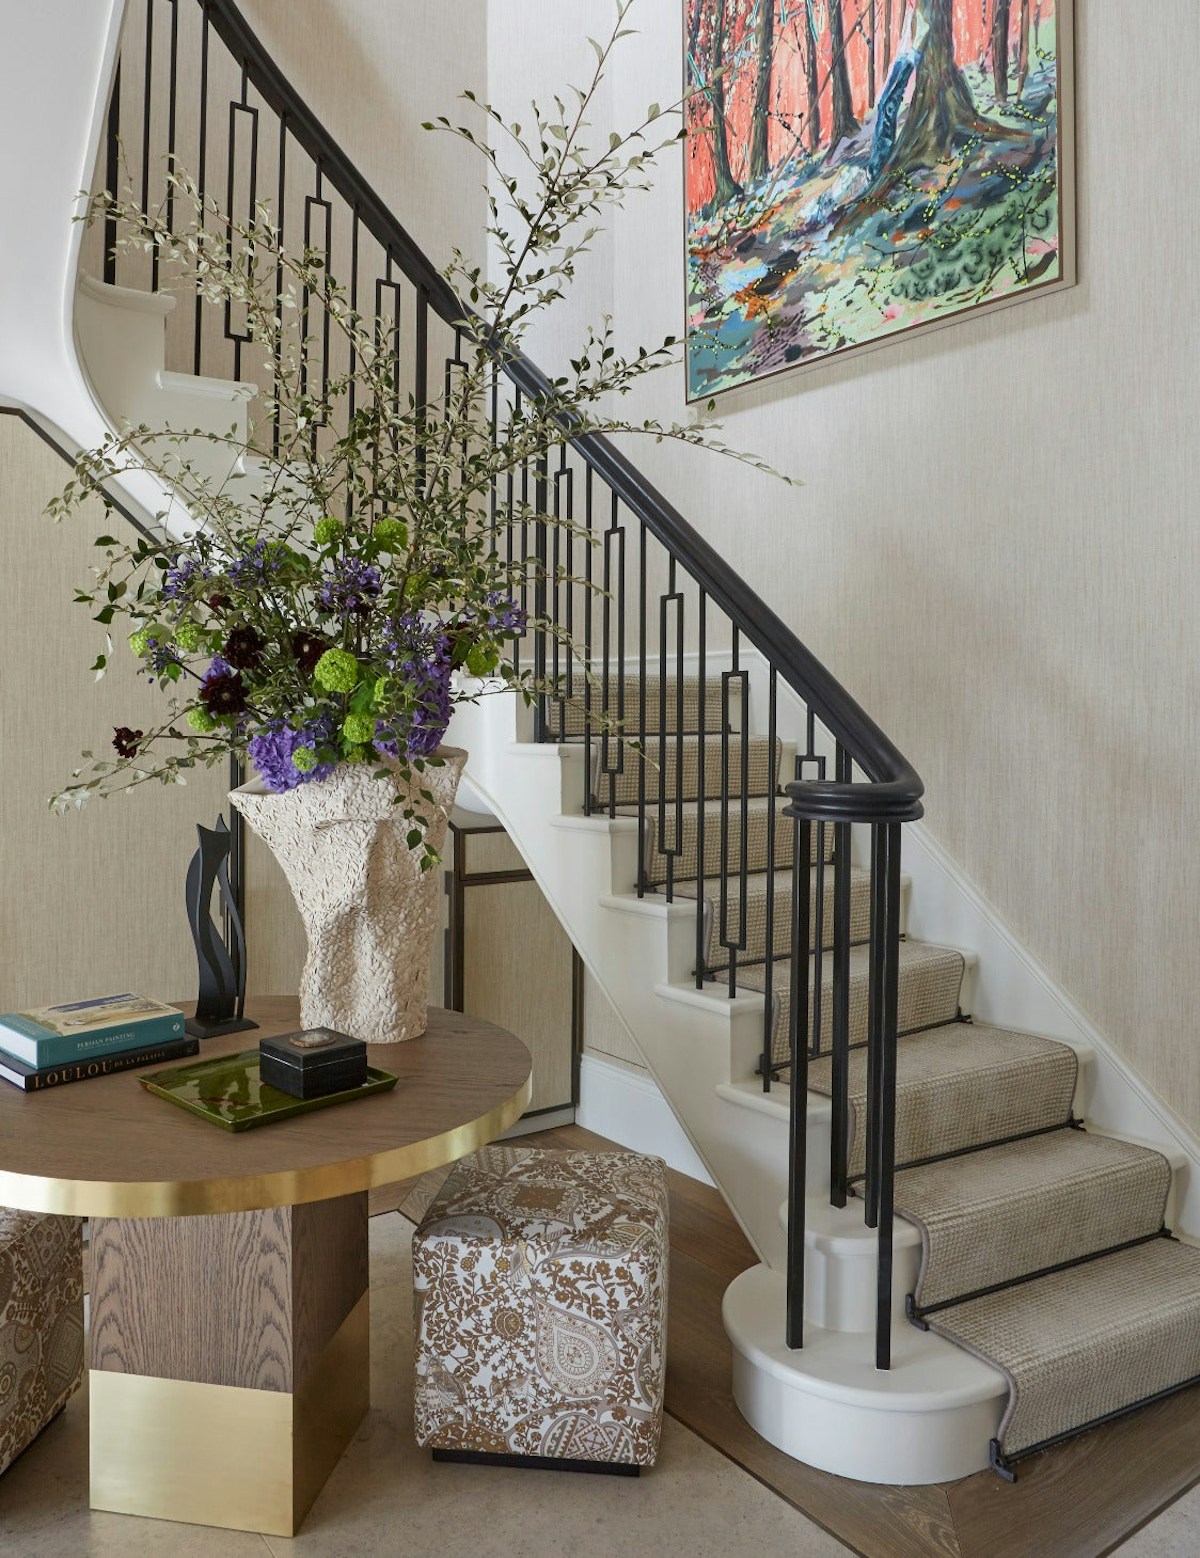 7 Ways To Decorate With Flowers In Your Home Interior - Helen Green Design - LuxDeco Style Guide